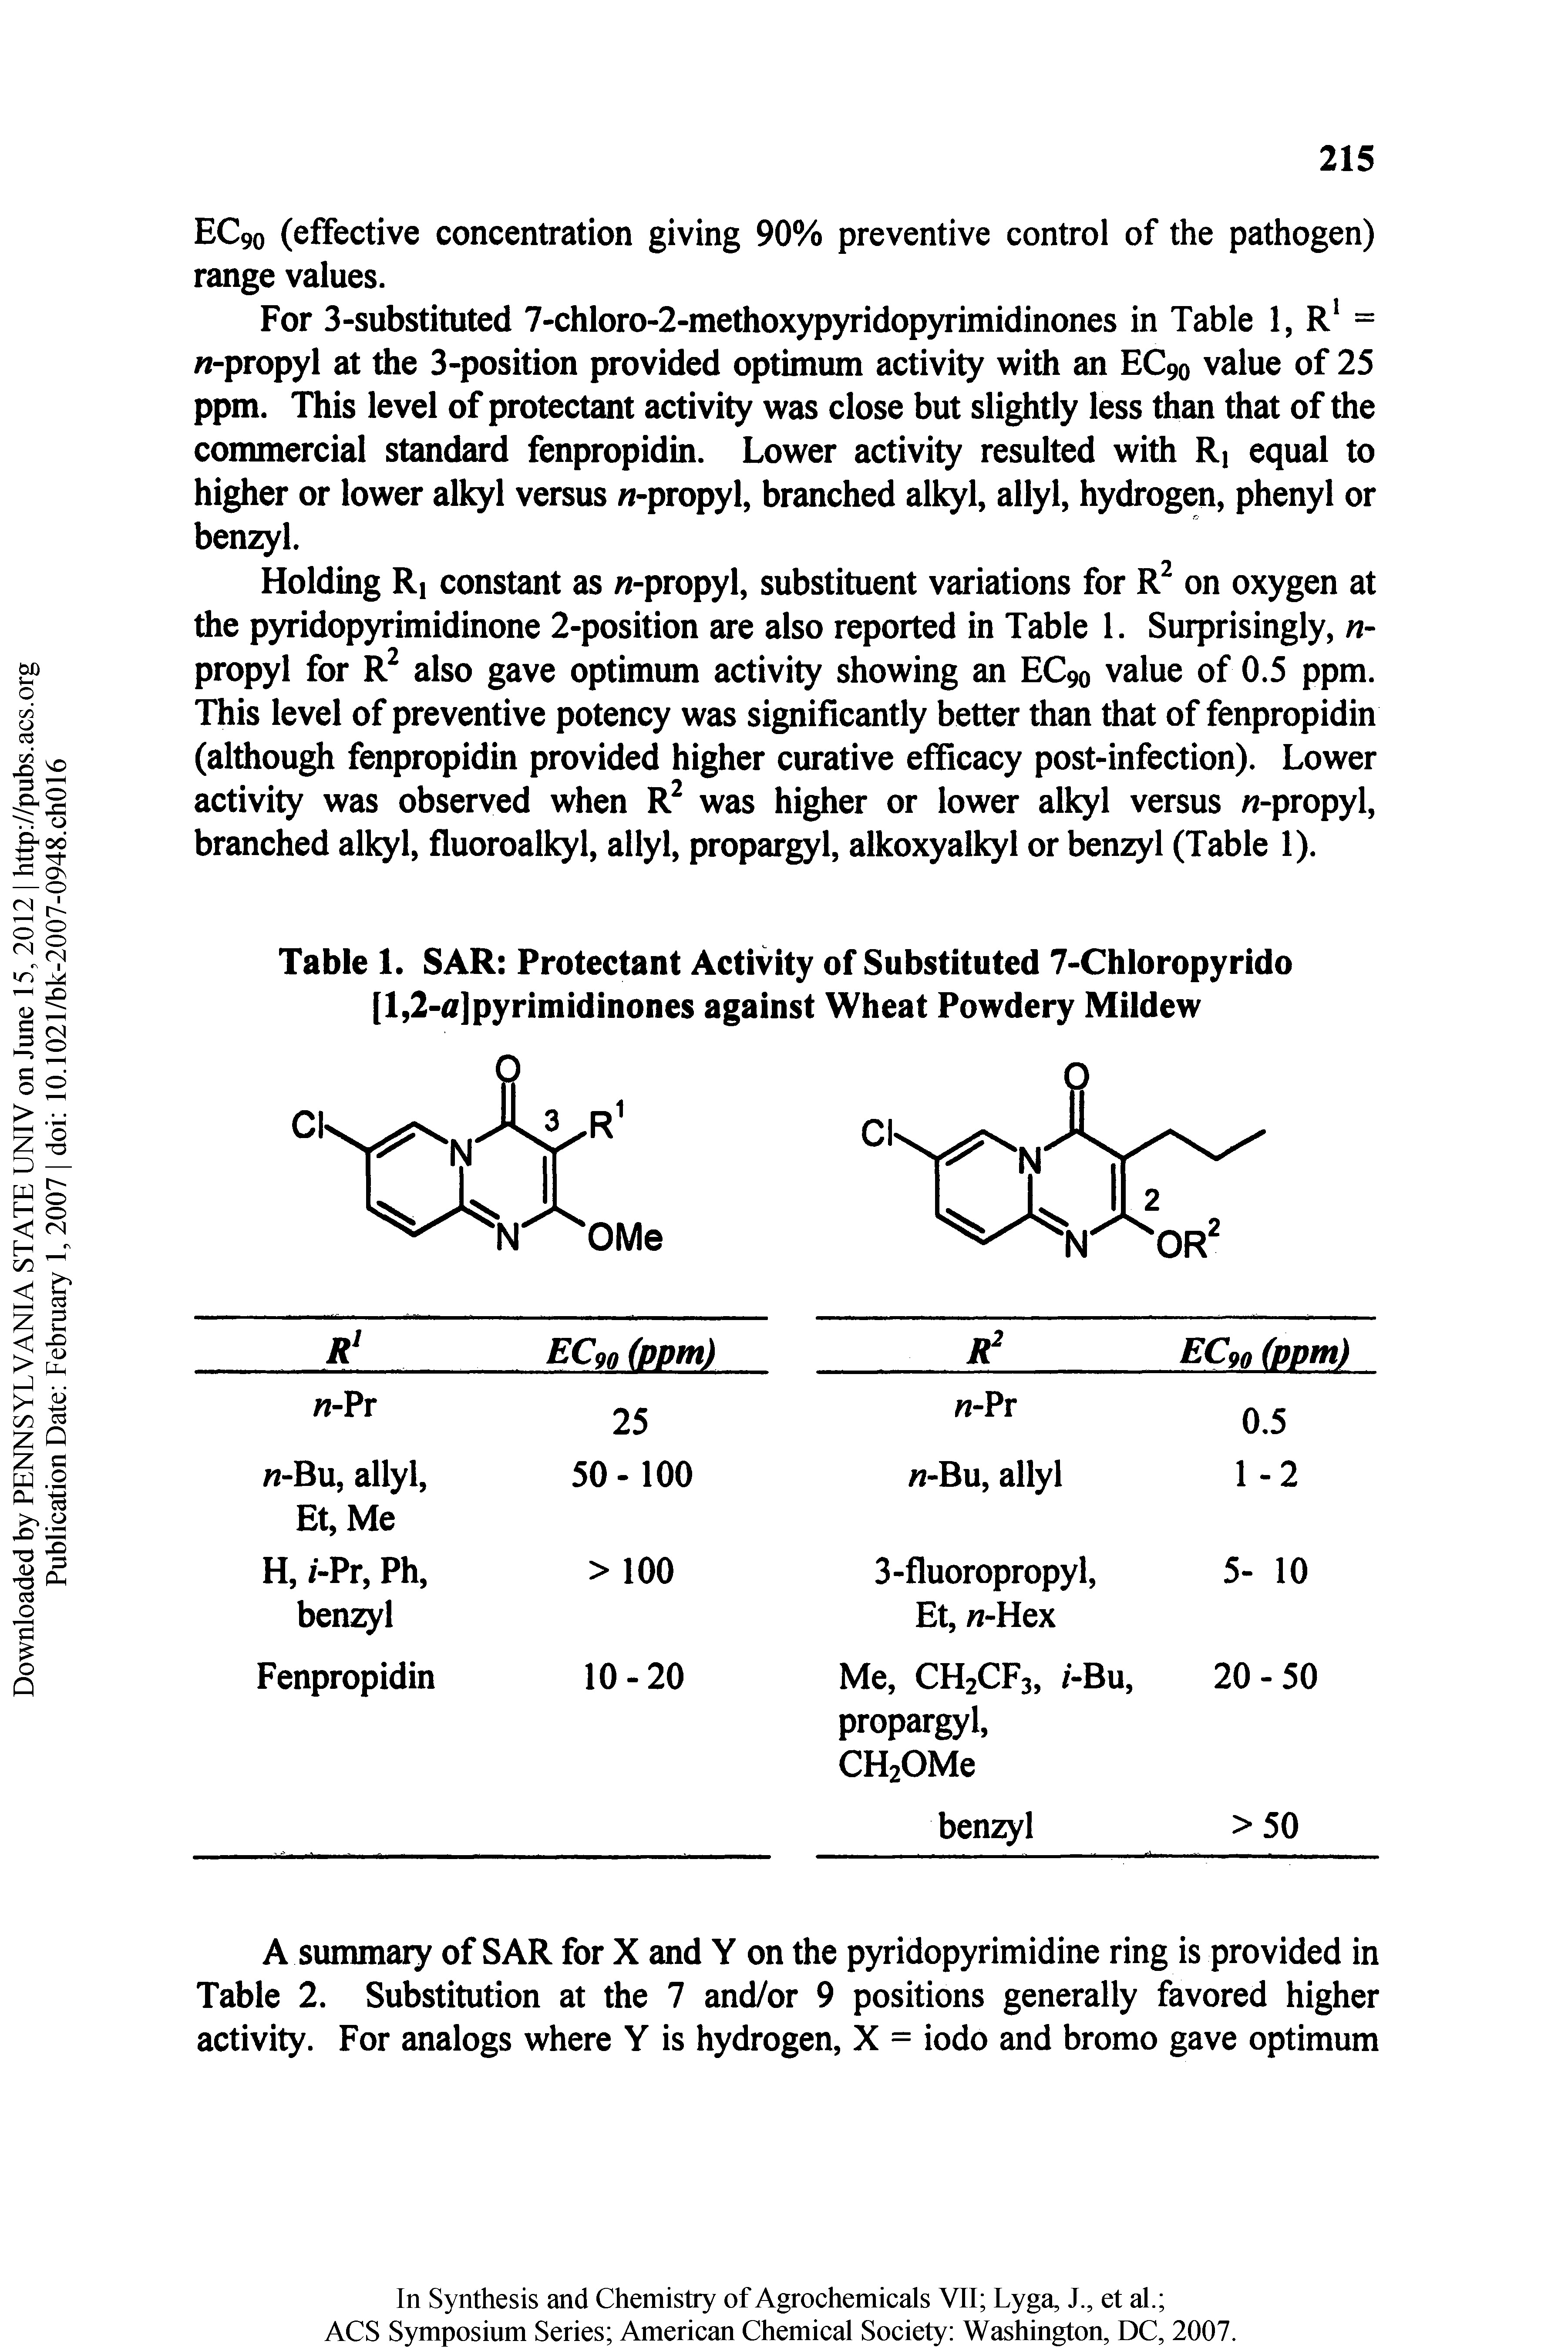 Table 1. SAR Protectant Activity of Substituted 7-Chioropyrido [l,2-a]pyrimidinones against Wheat Powdery Mildew...